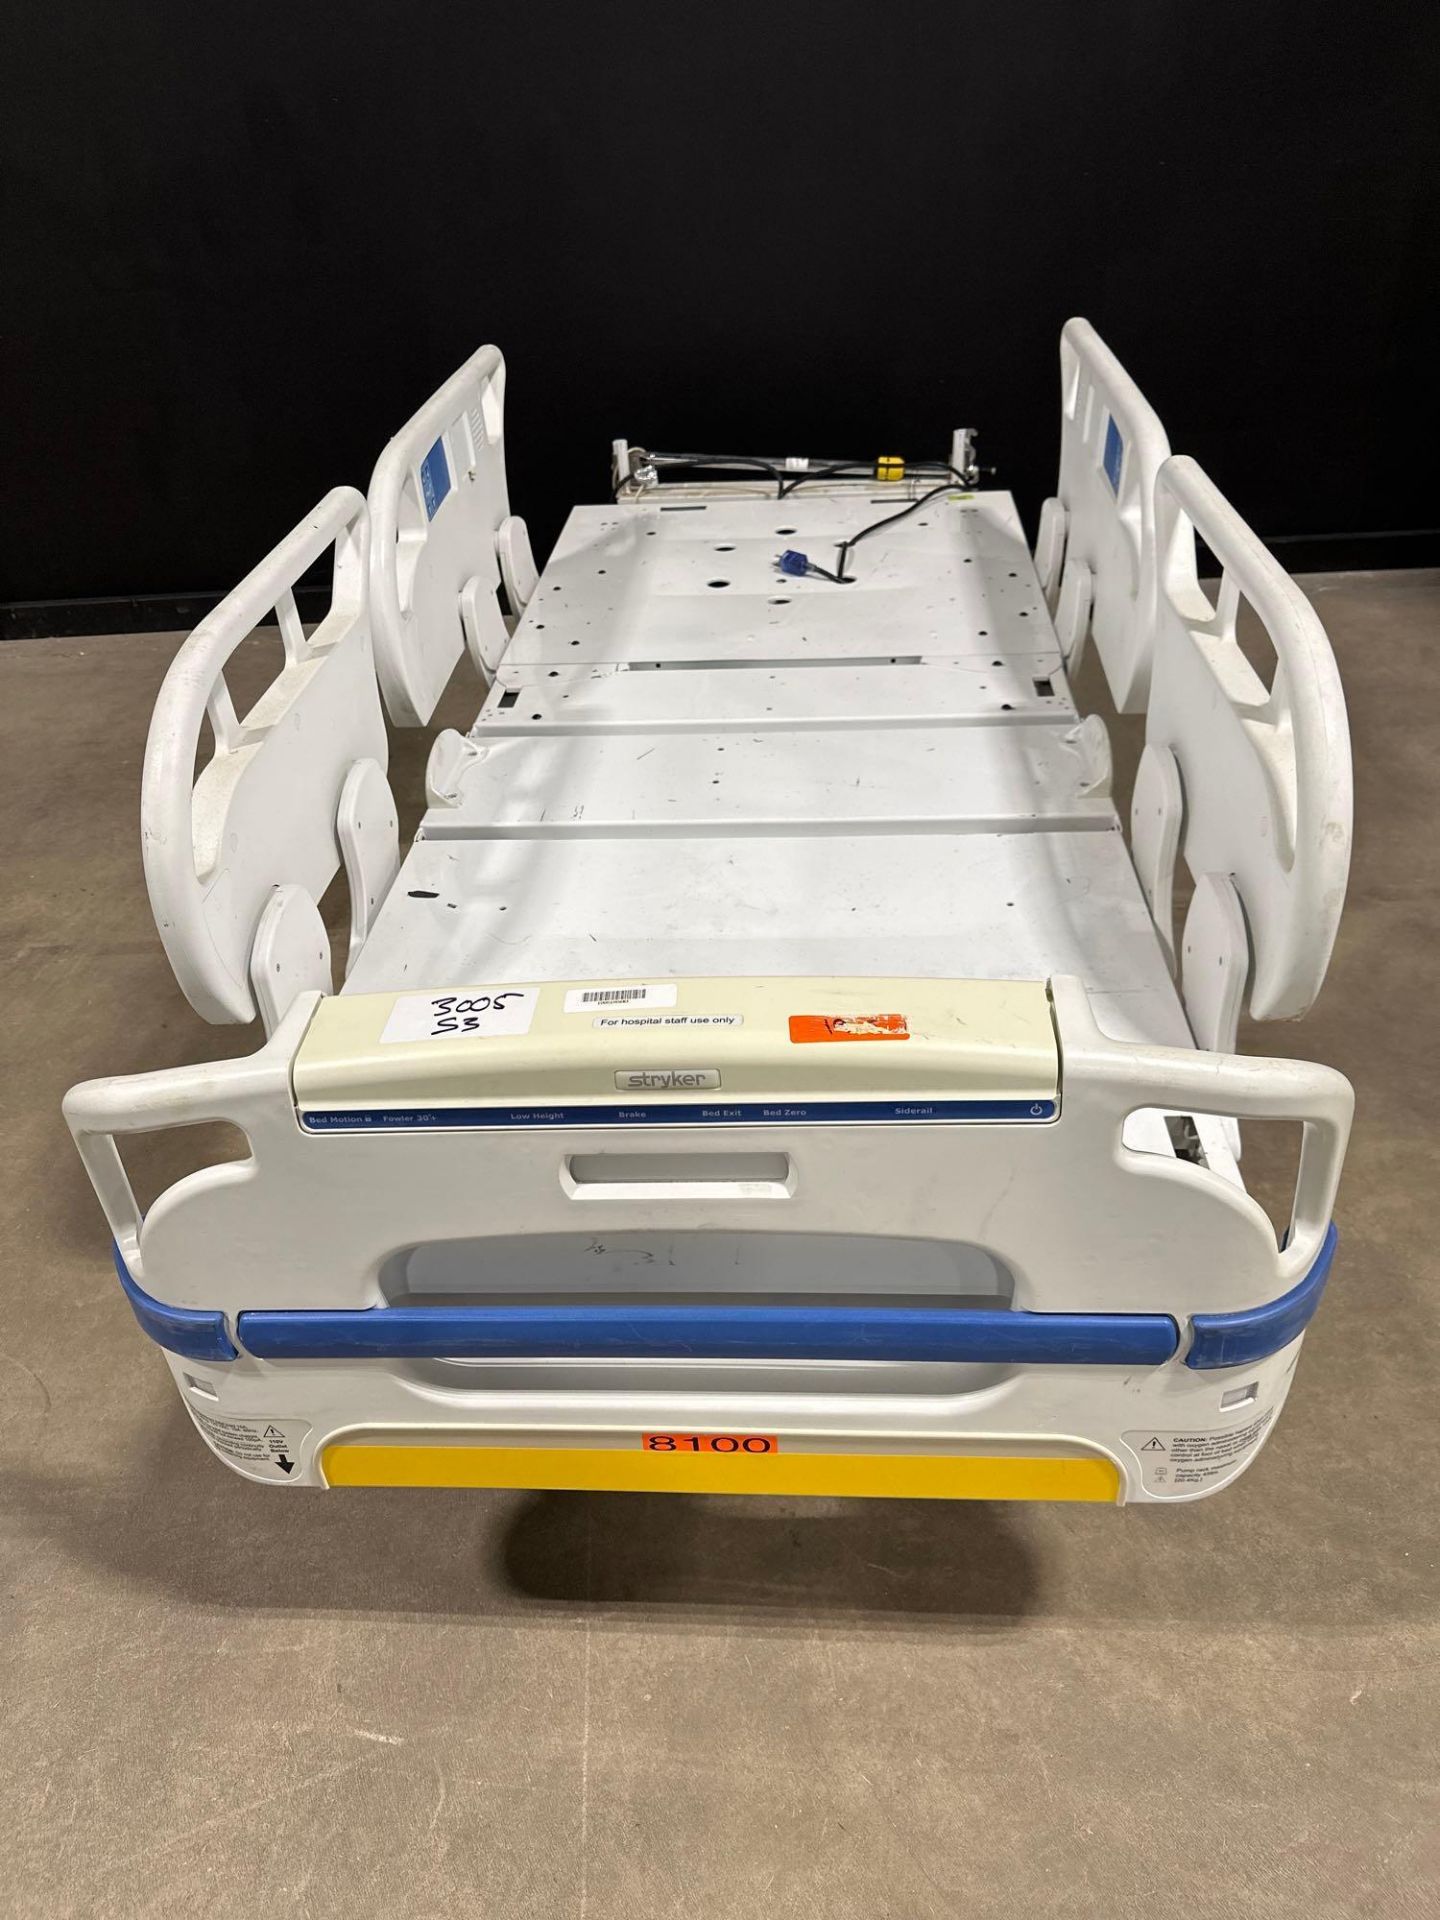 STRYKER 3005 S3 HOSPITAL BED - Image 2 of 4